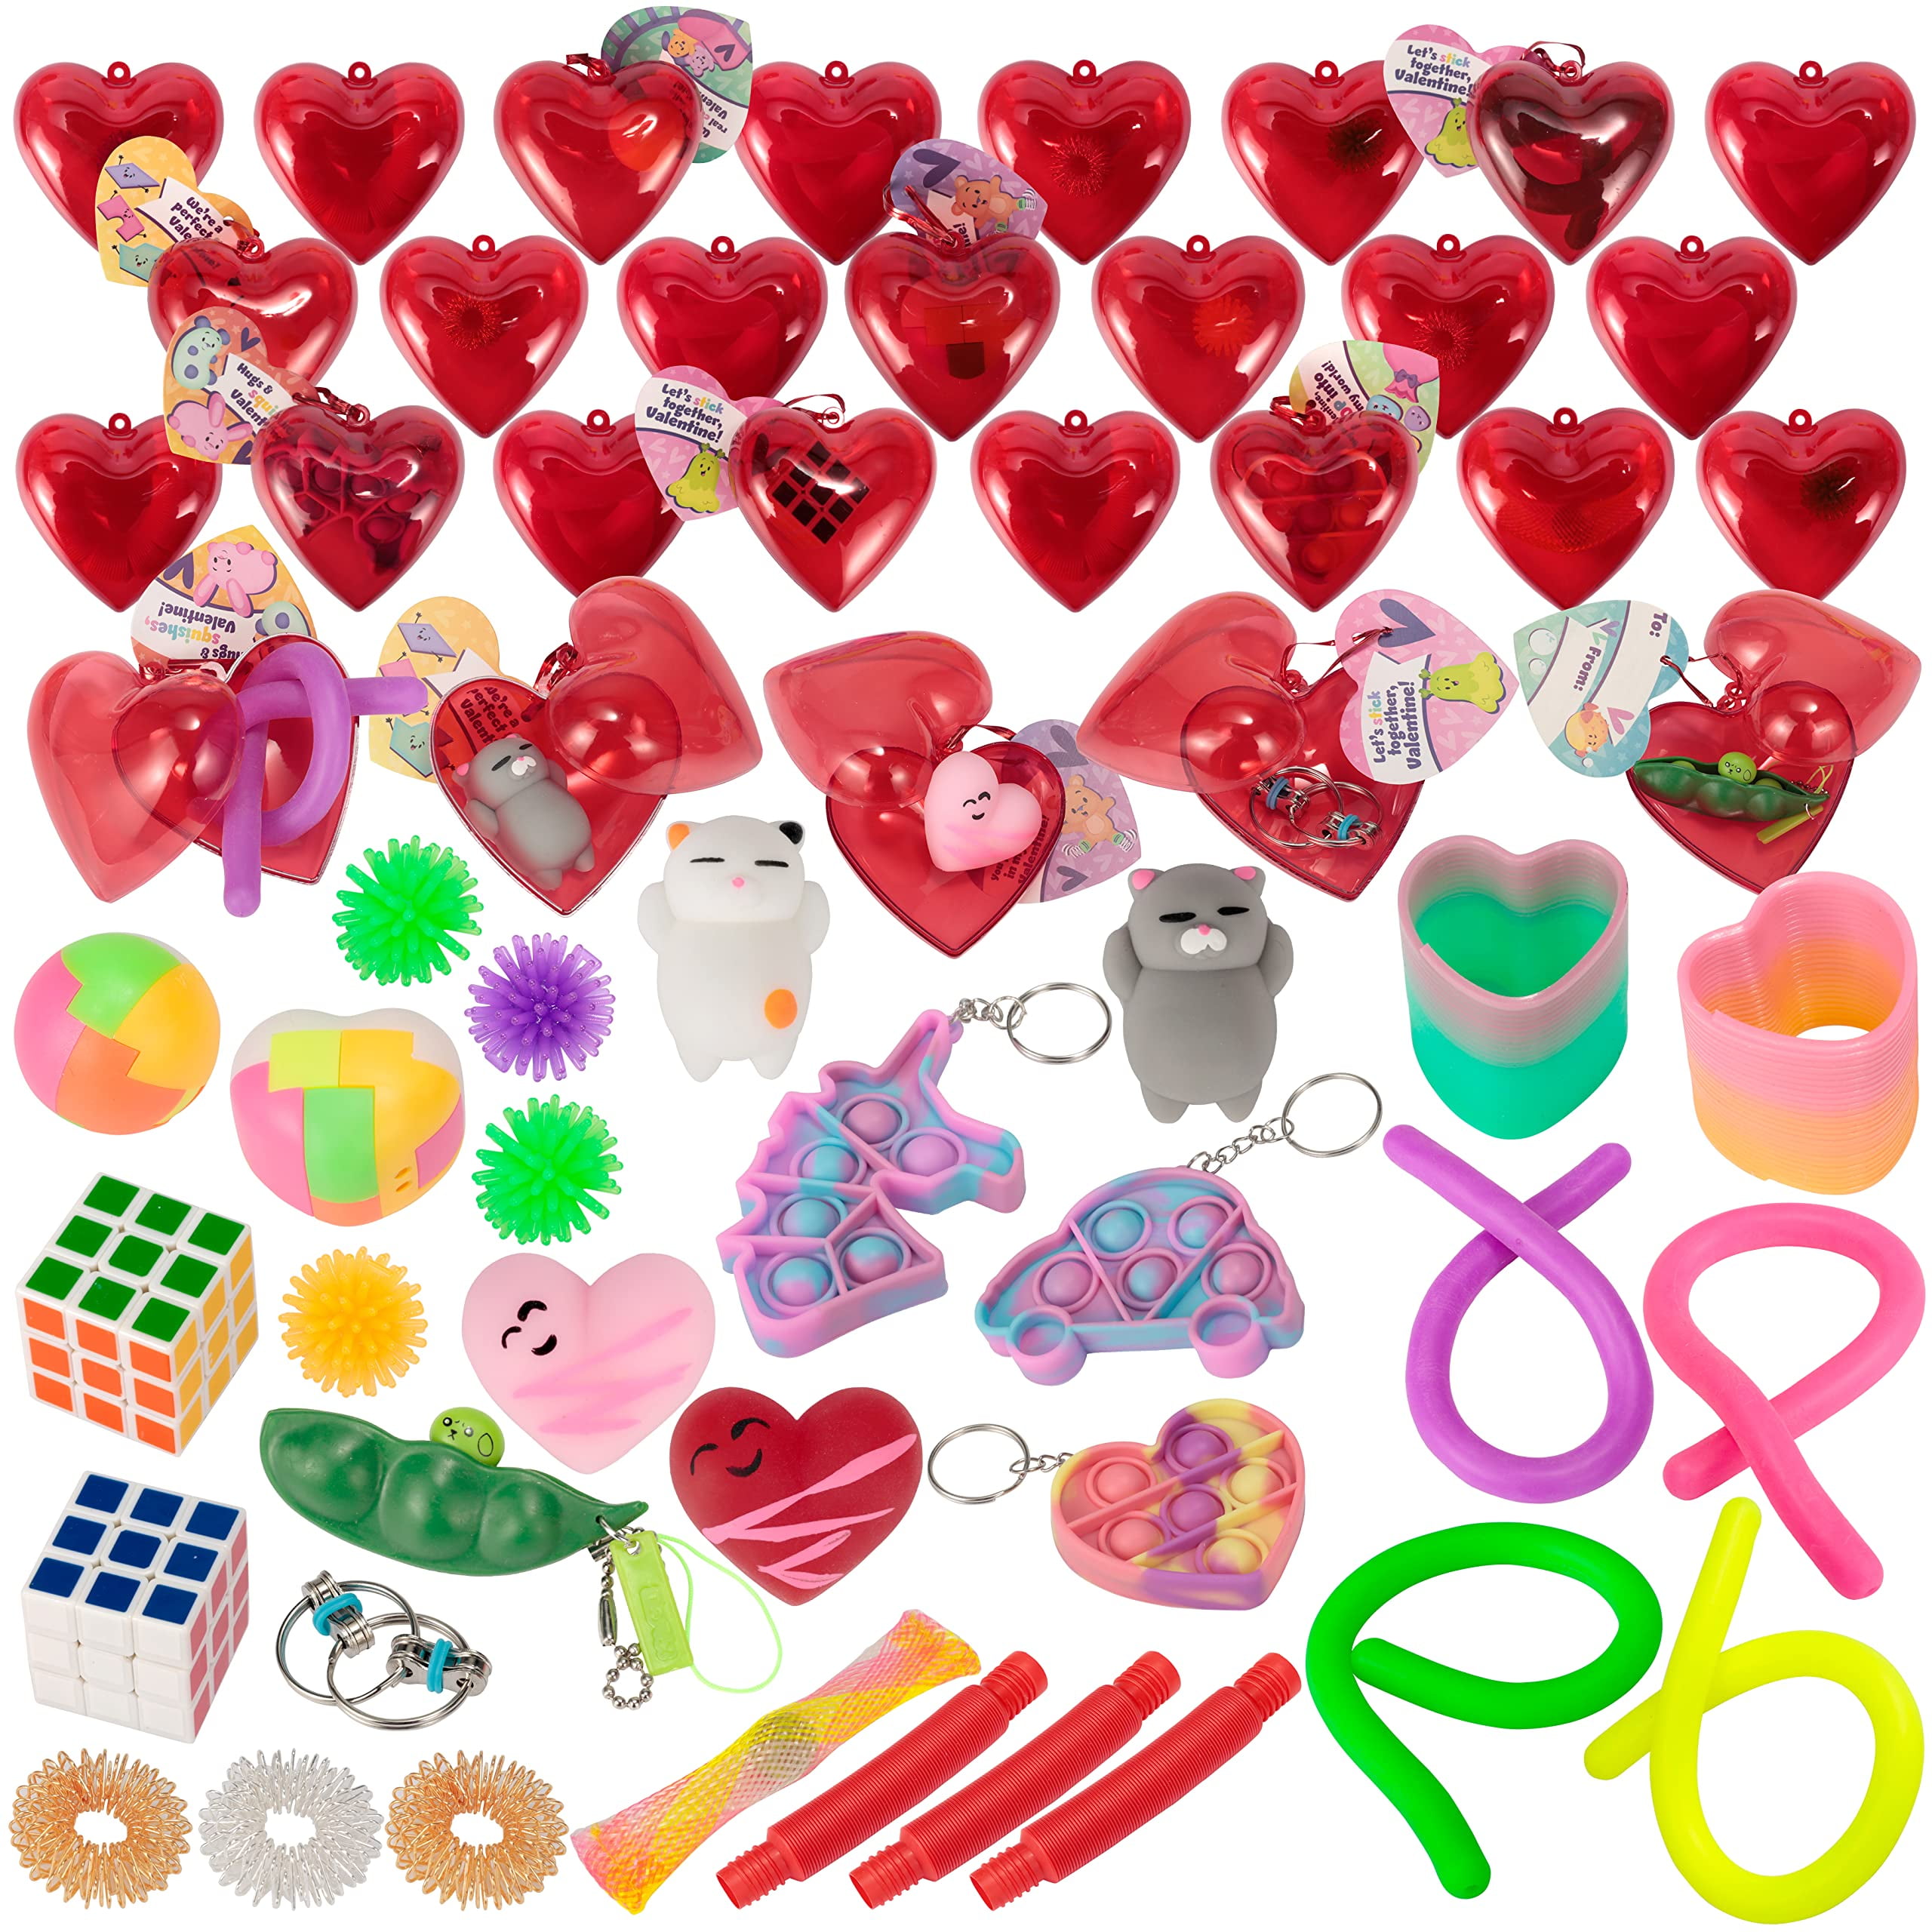 Valentines Day Gifts for Kids,192 Pcs Kids Valentines Day Gifts for School,Stati